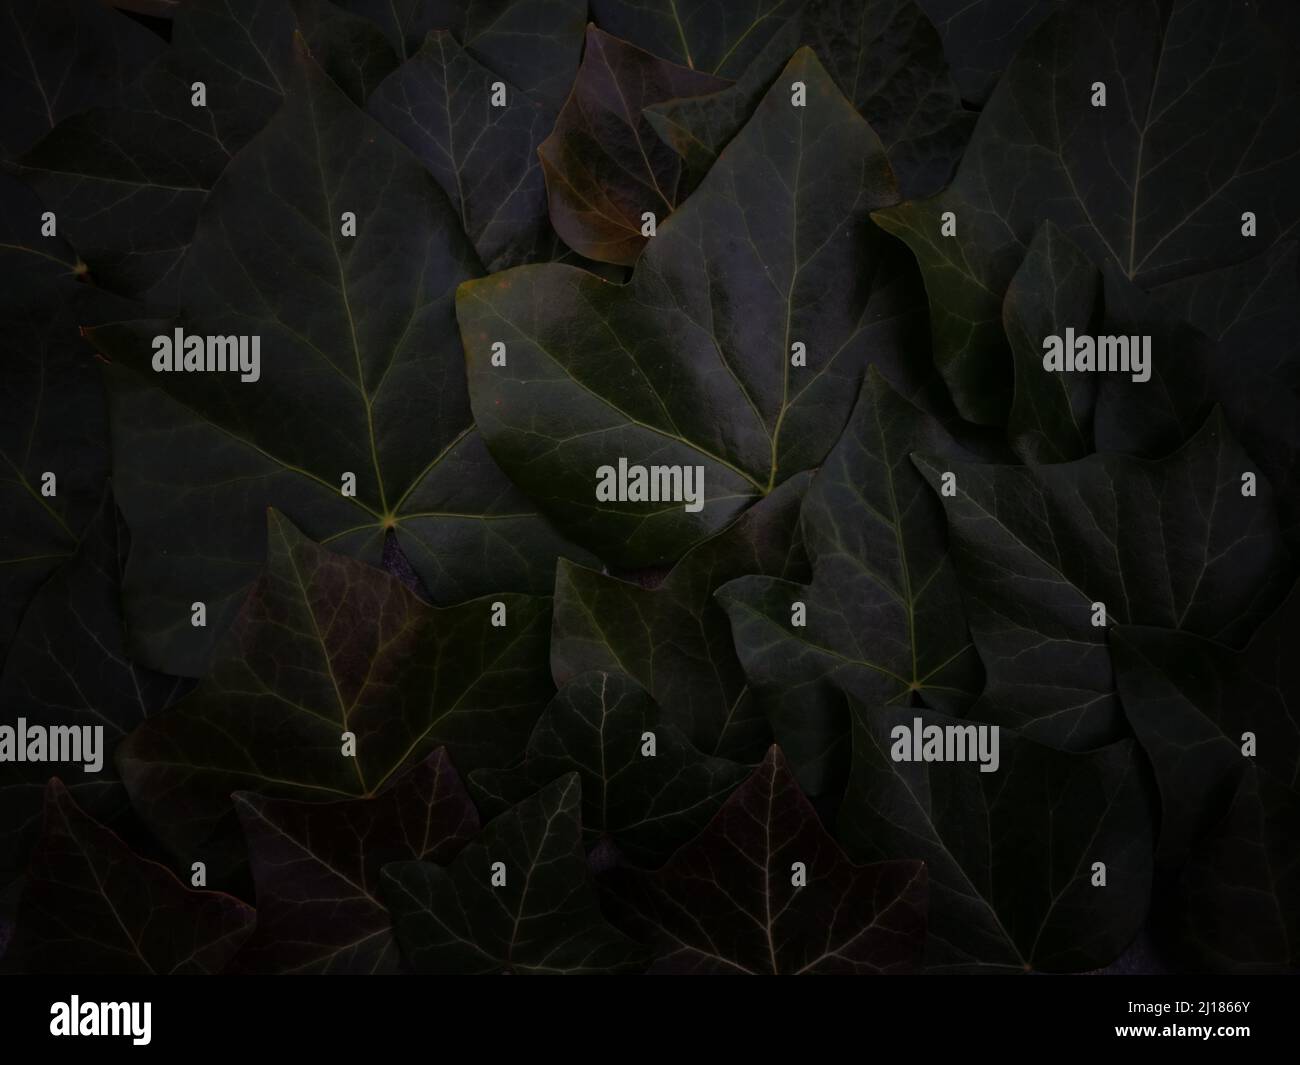 Undisturbing background of dimly lit dark green ivy foliage or ivy leafage perfect as background or template for a card, a website or as a screensaver Stock Photo